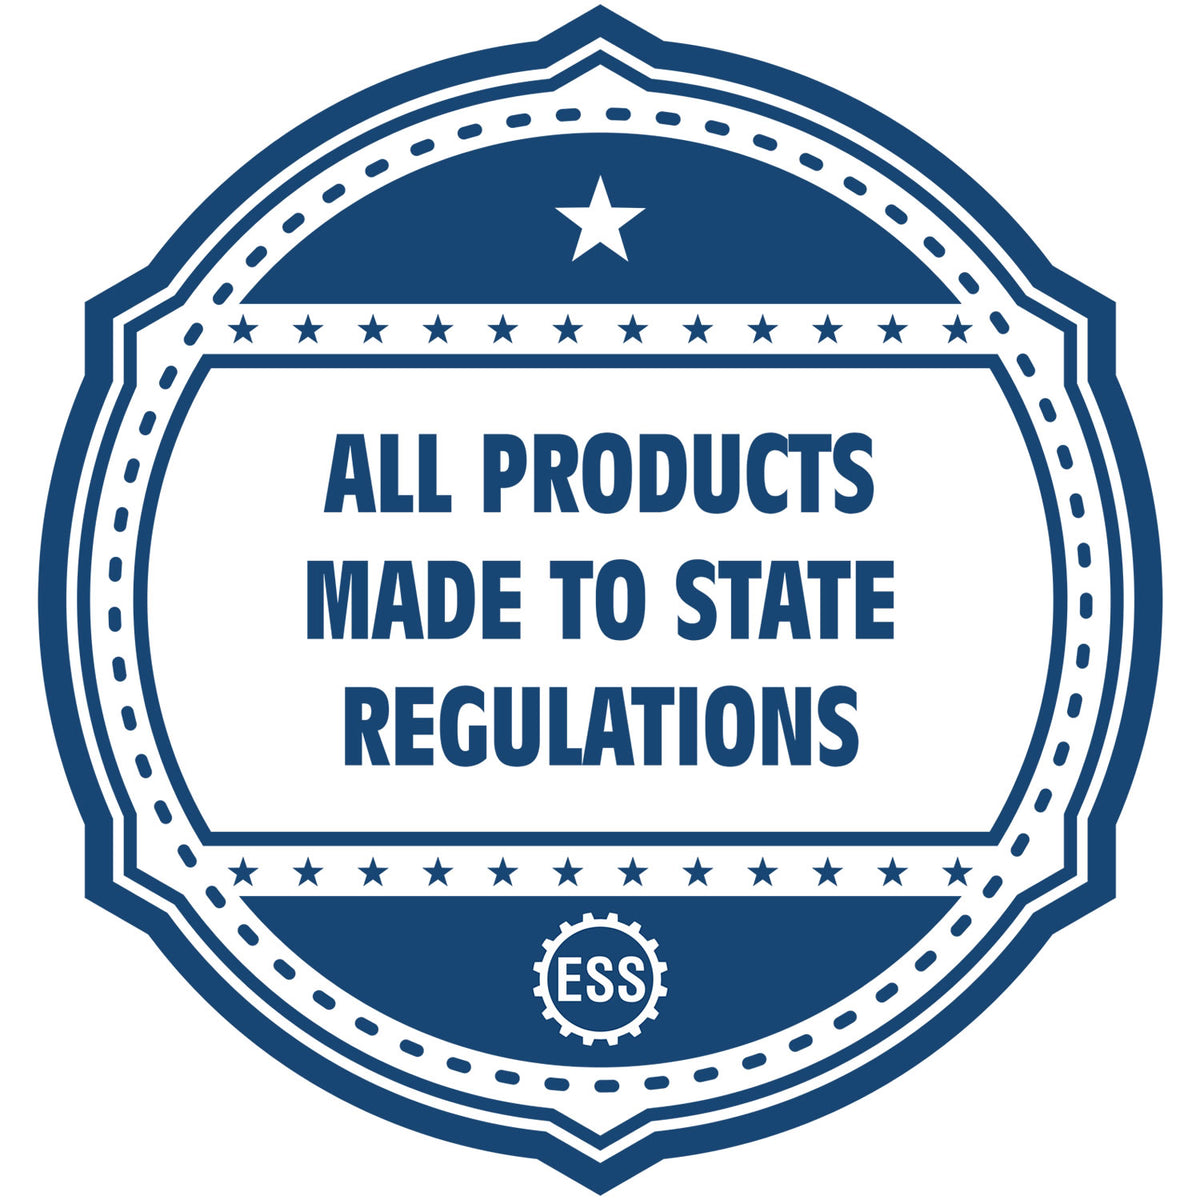 An icon or badge element for the Digital Virginia PE Stamp and Electronic Seal for Virginia Engineer showing that this product is made in compliance with state regulations.